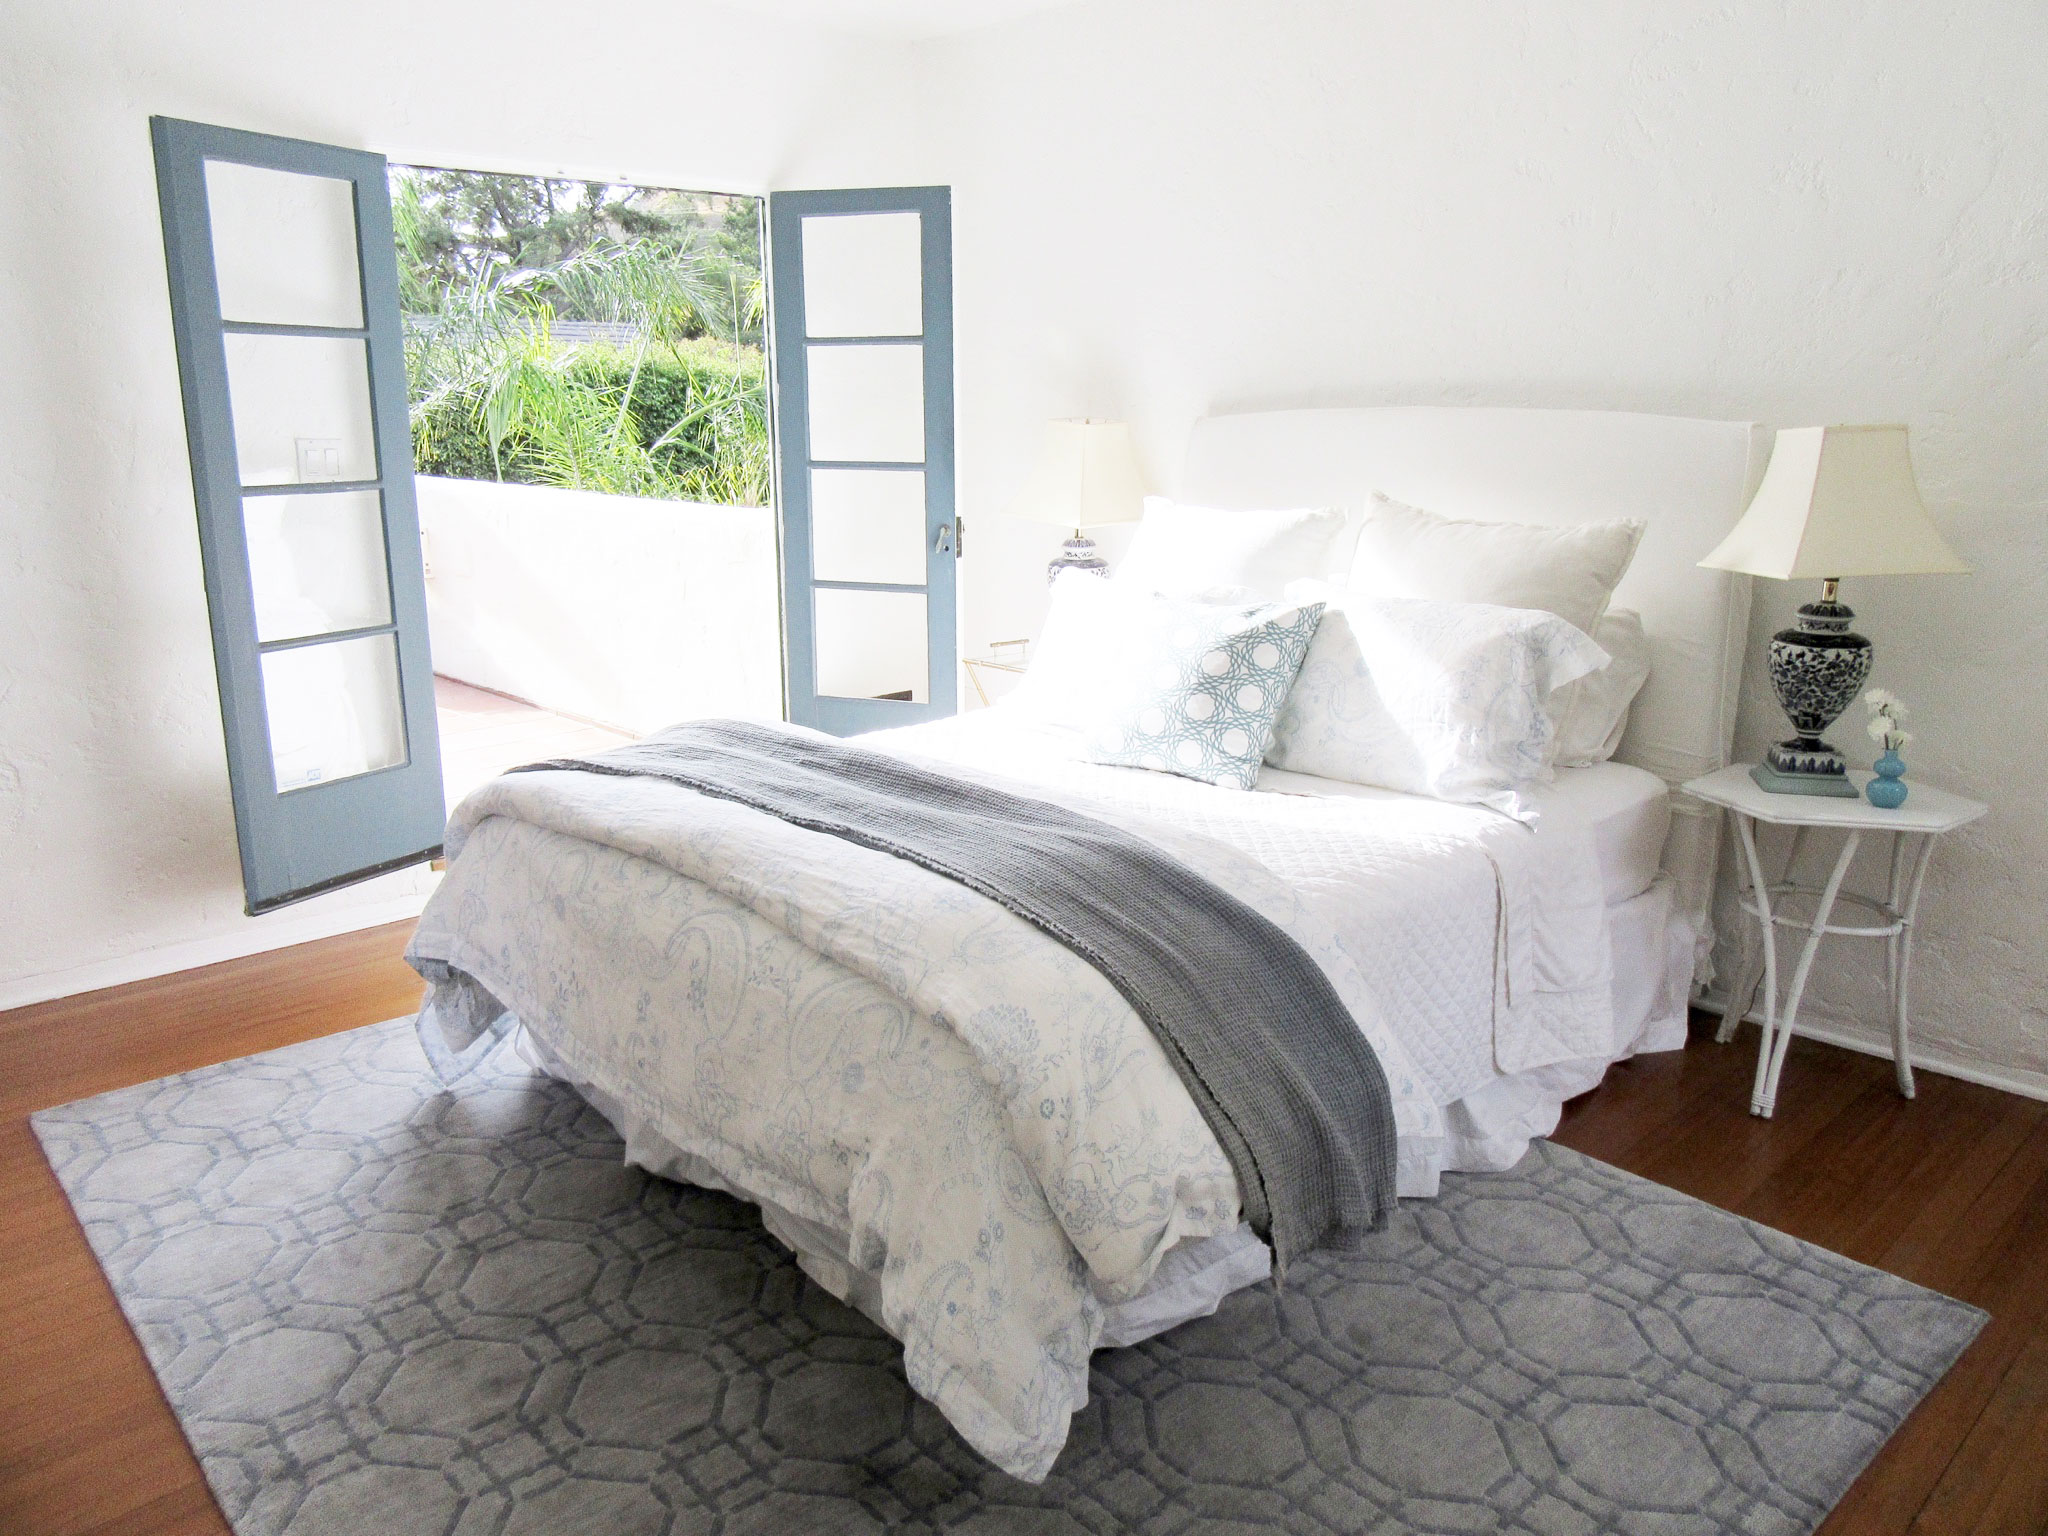 Beyond Aesthetics: The Practical Benefits Of Bedroom Rug Choices